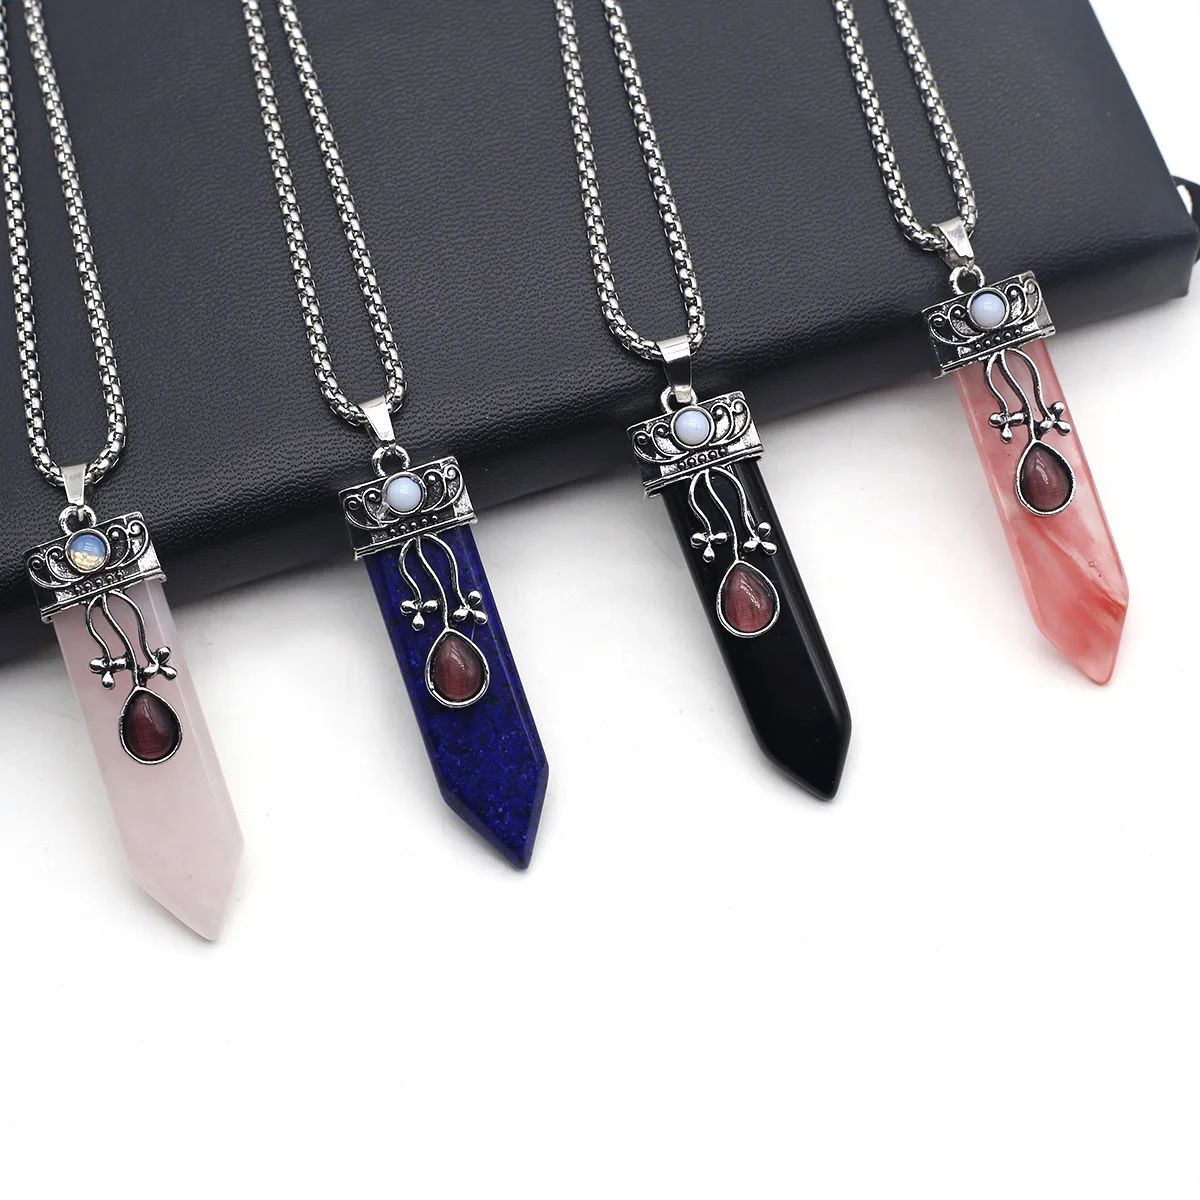 

Metal Chain Sword Shape Pendant Natural Stone Reiki Healing Pendant Necklace Reiki Healing Beautiful And Charming Gift